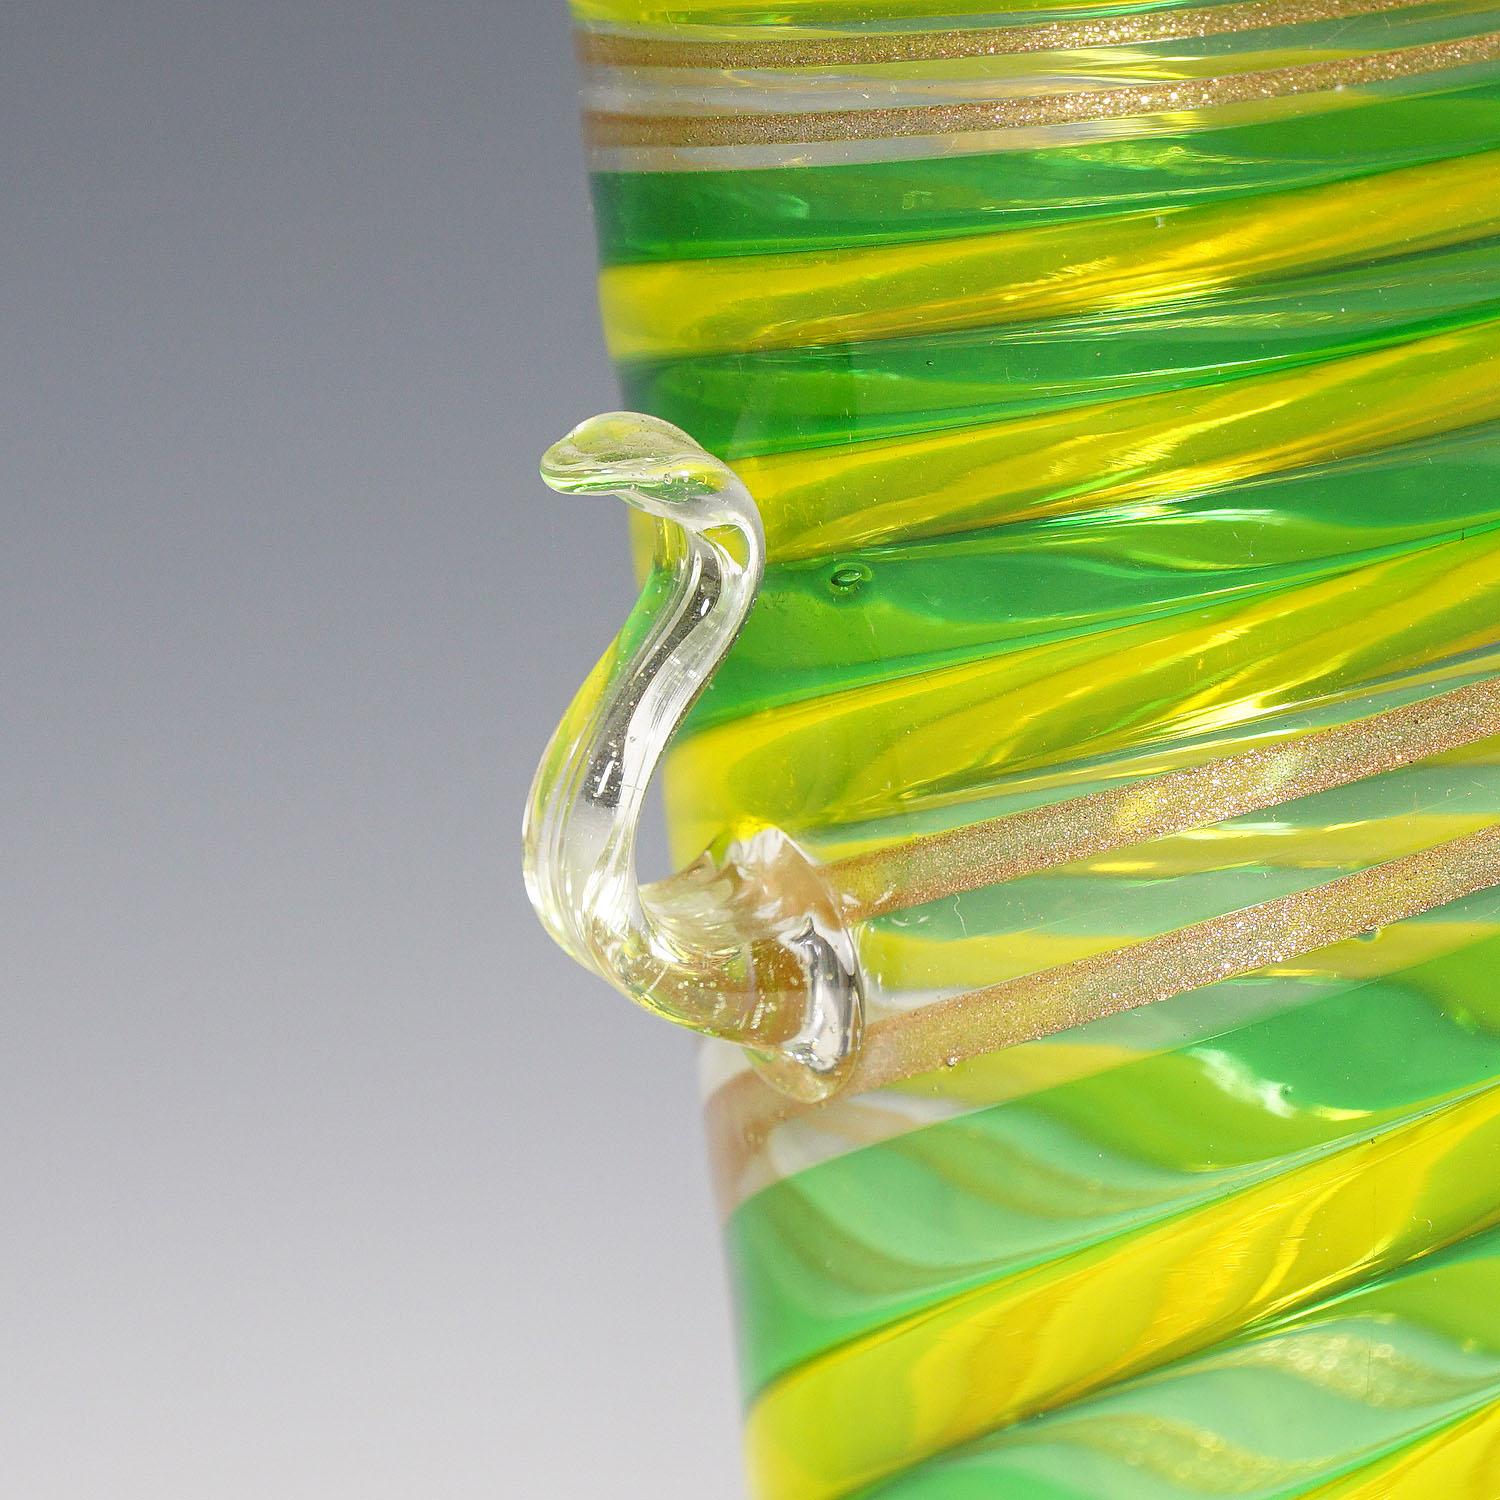 Mid-Century Modern Fratelli Toso 'A Canne' Vase with Aventurin, Murano, Italy ca. 1965